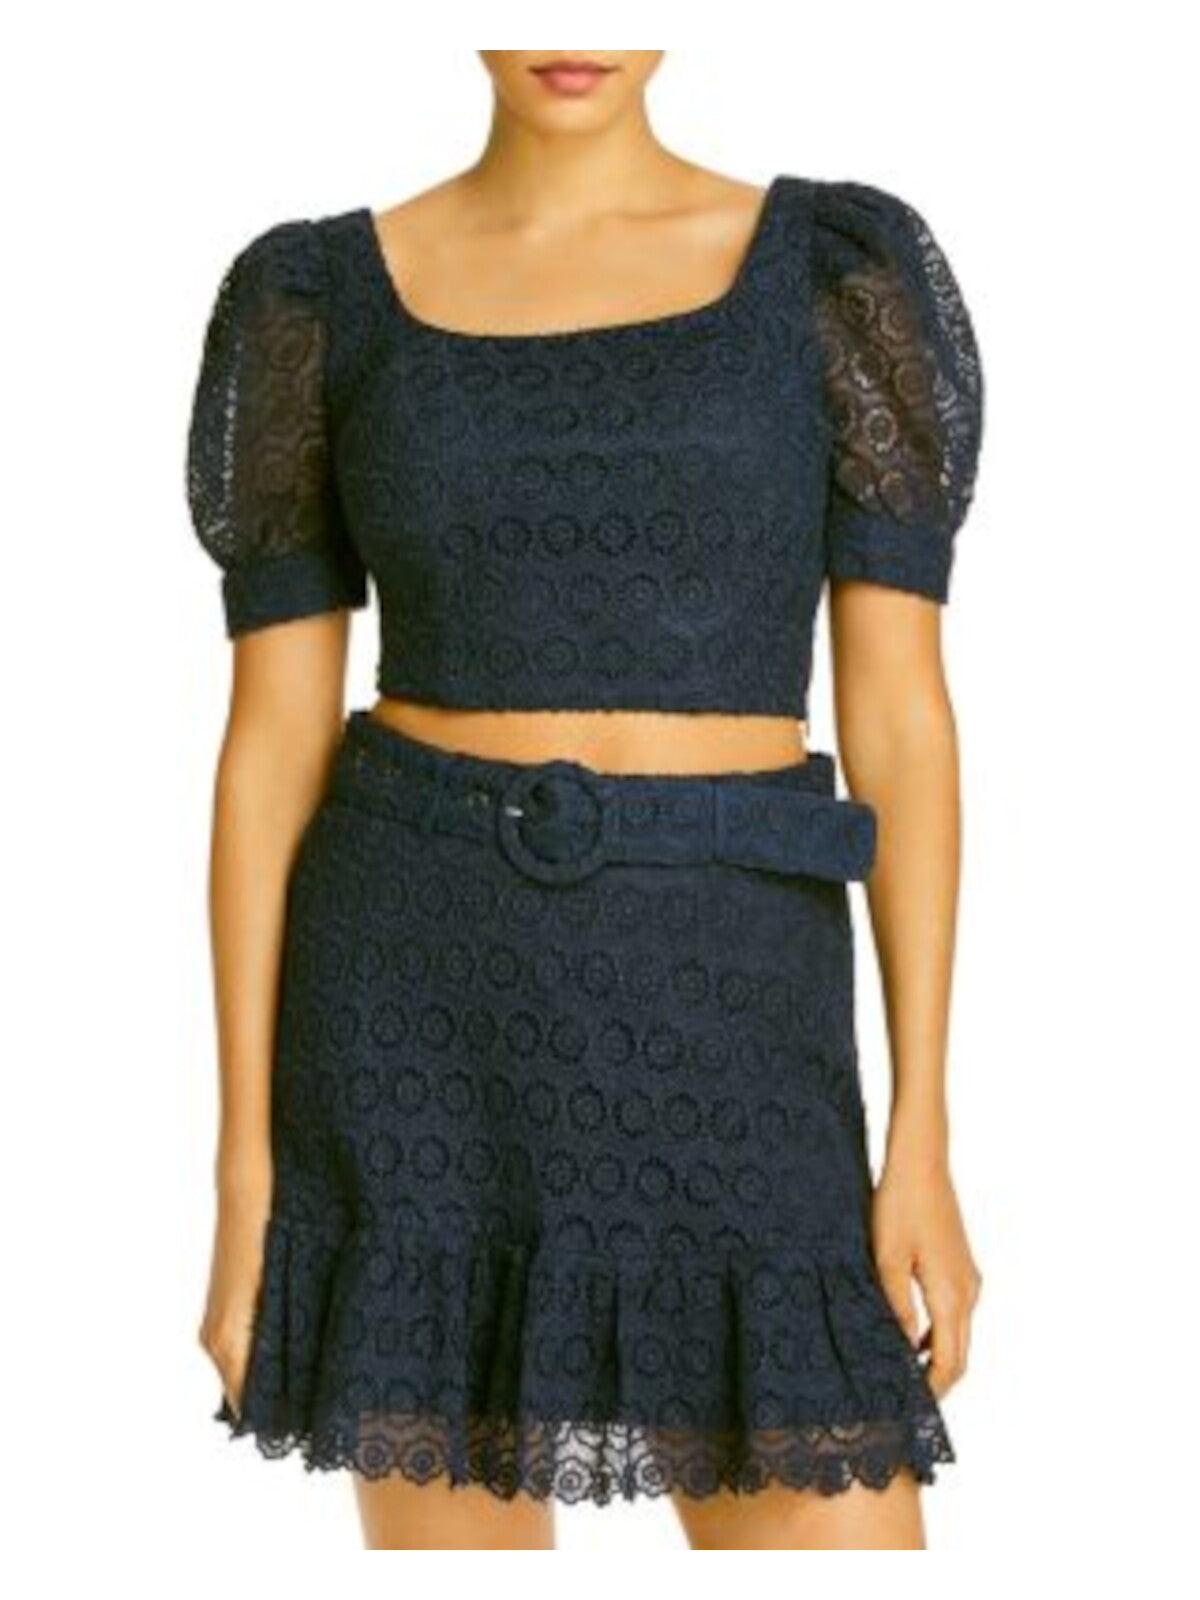 AQUA Womens Navy Lace Belted Pleated Floral Mini Pencil Party Skirt Size: L